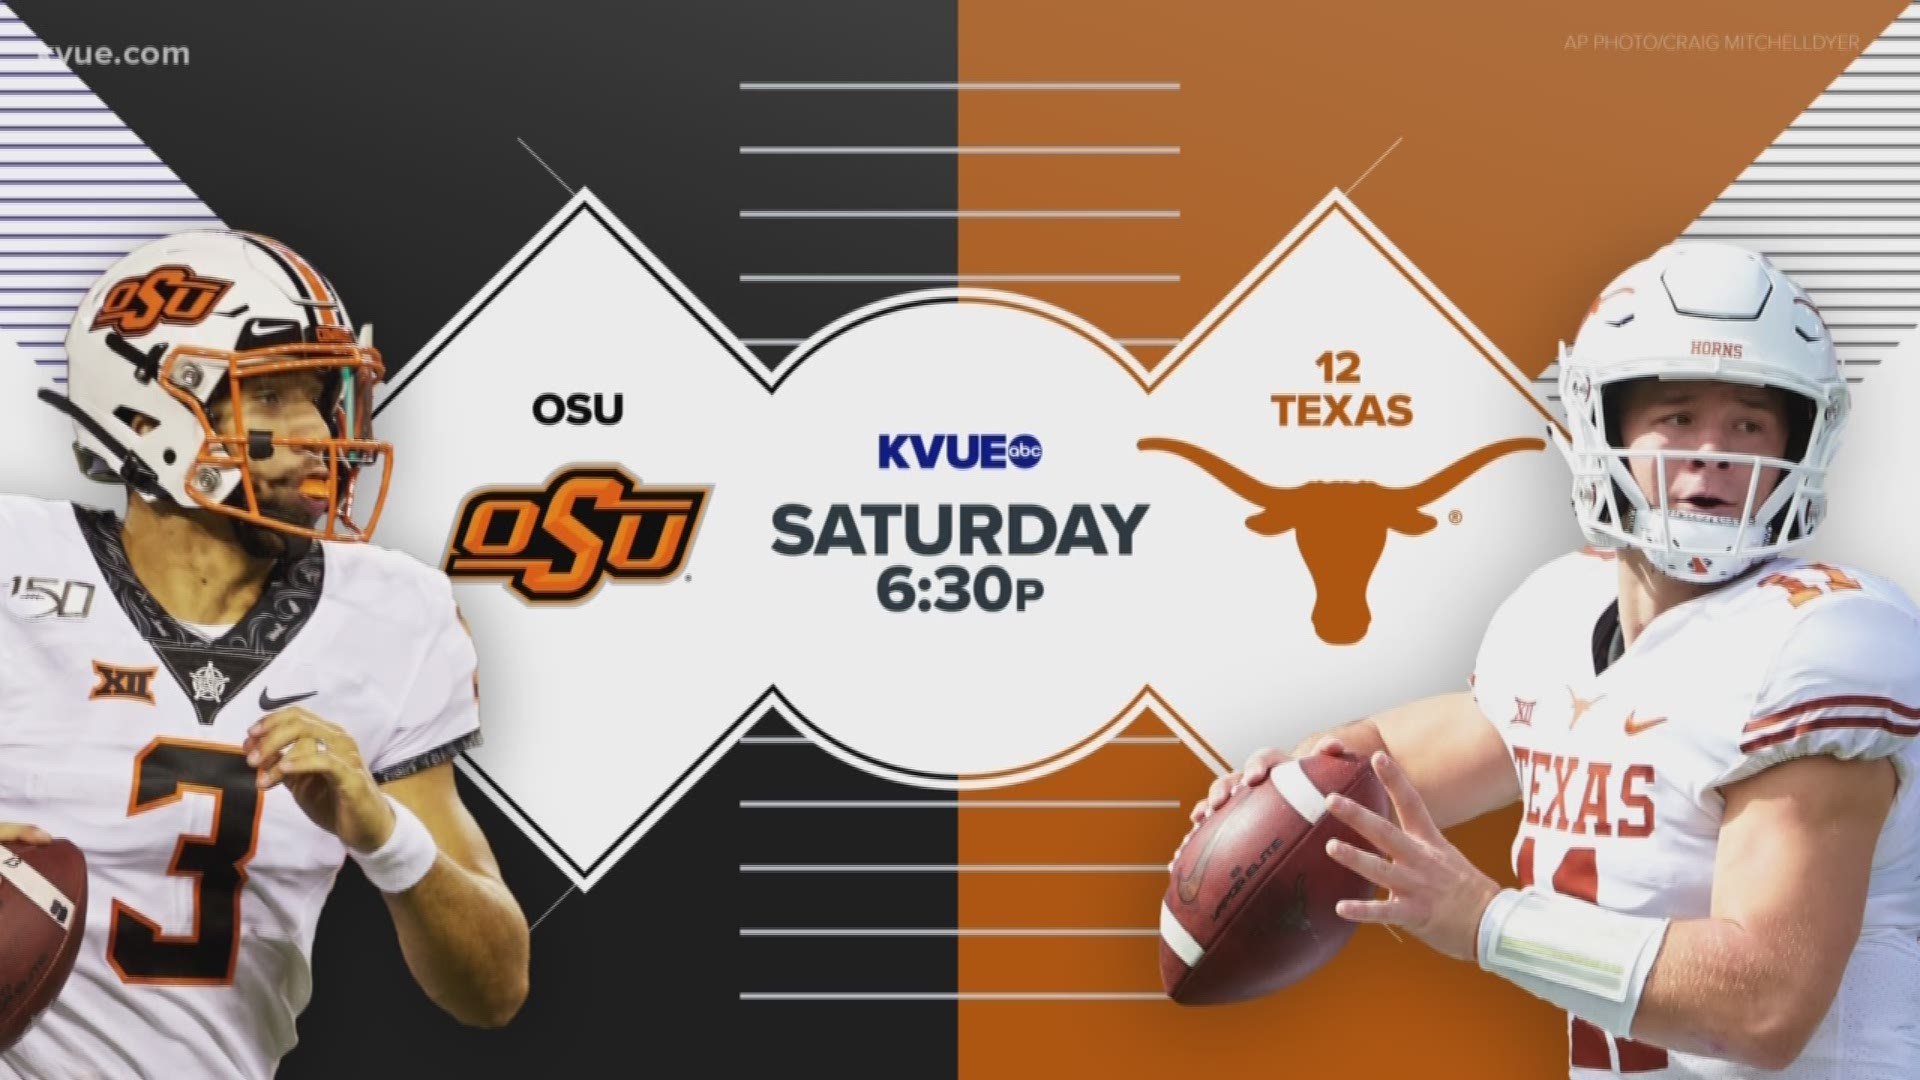 The Texas Longhorns will have to face the NCAA's leading rusher and receiver when they take on the Oklahoma State Cowboys on Sept. 21.